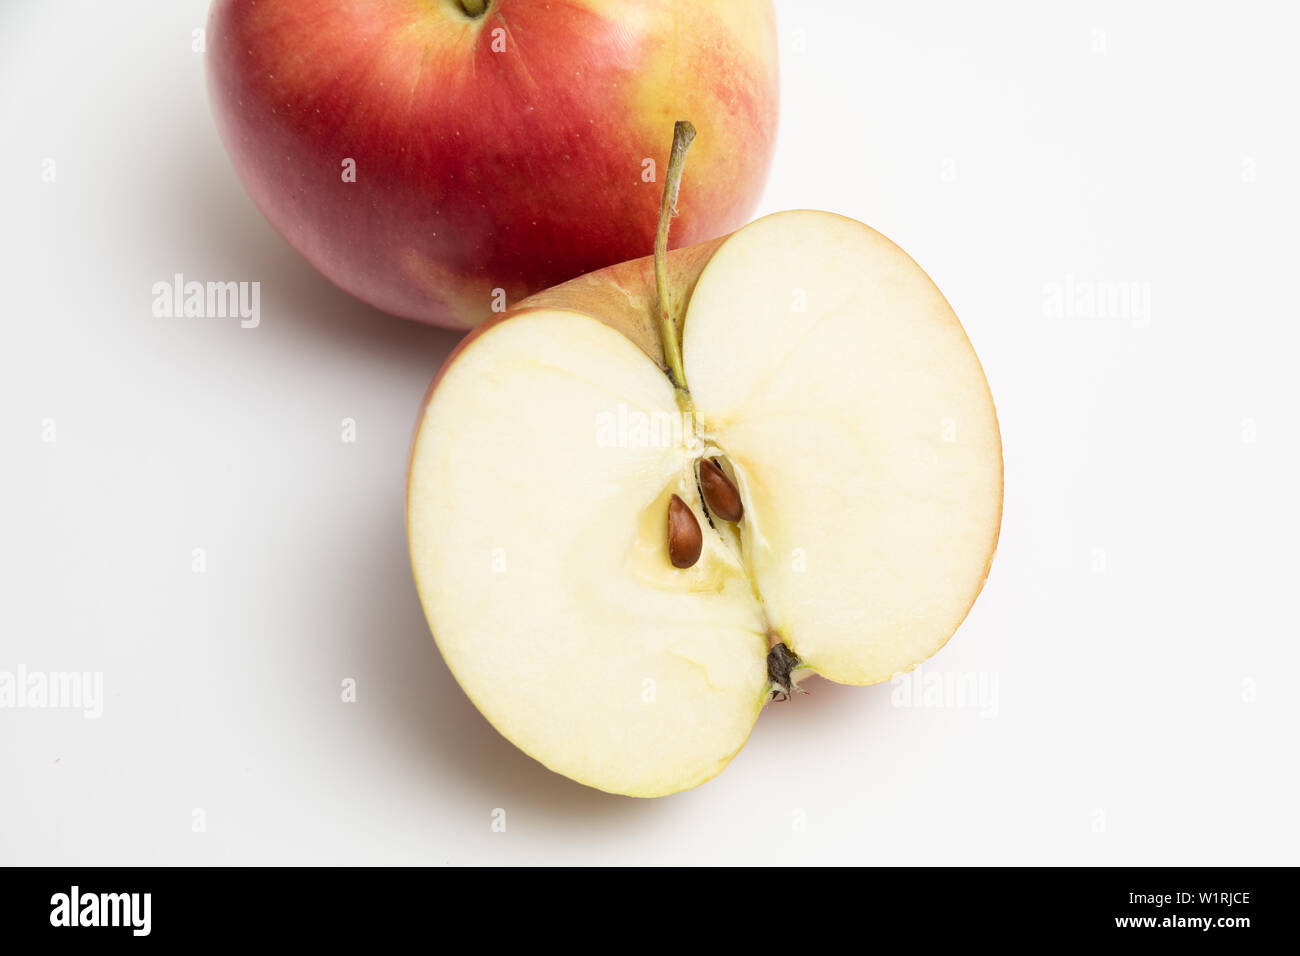 Description: Ripe fruit of red-green Apple with half of Apple Stock Photo